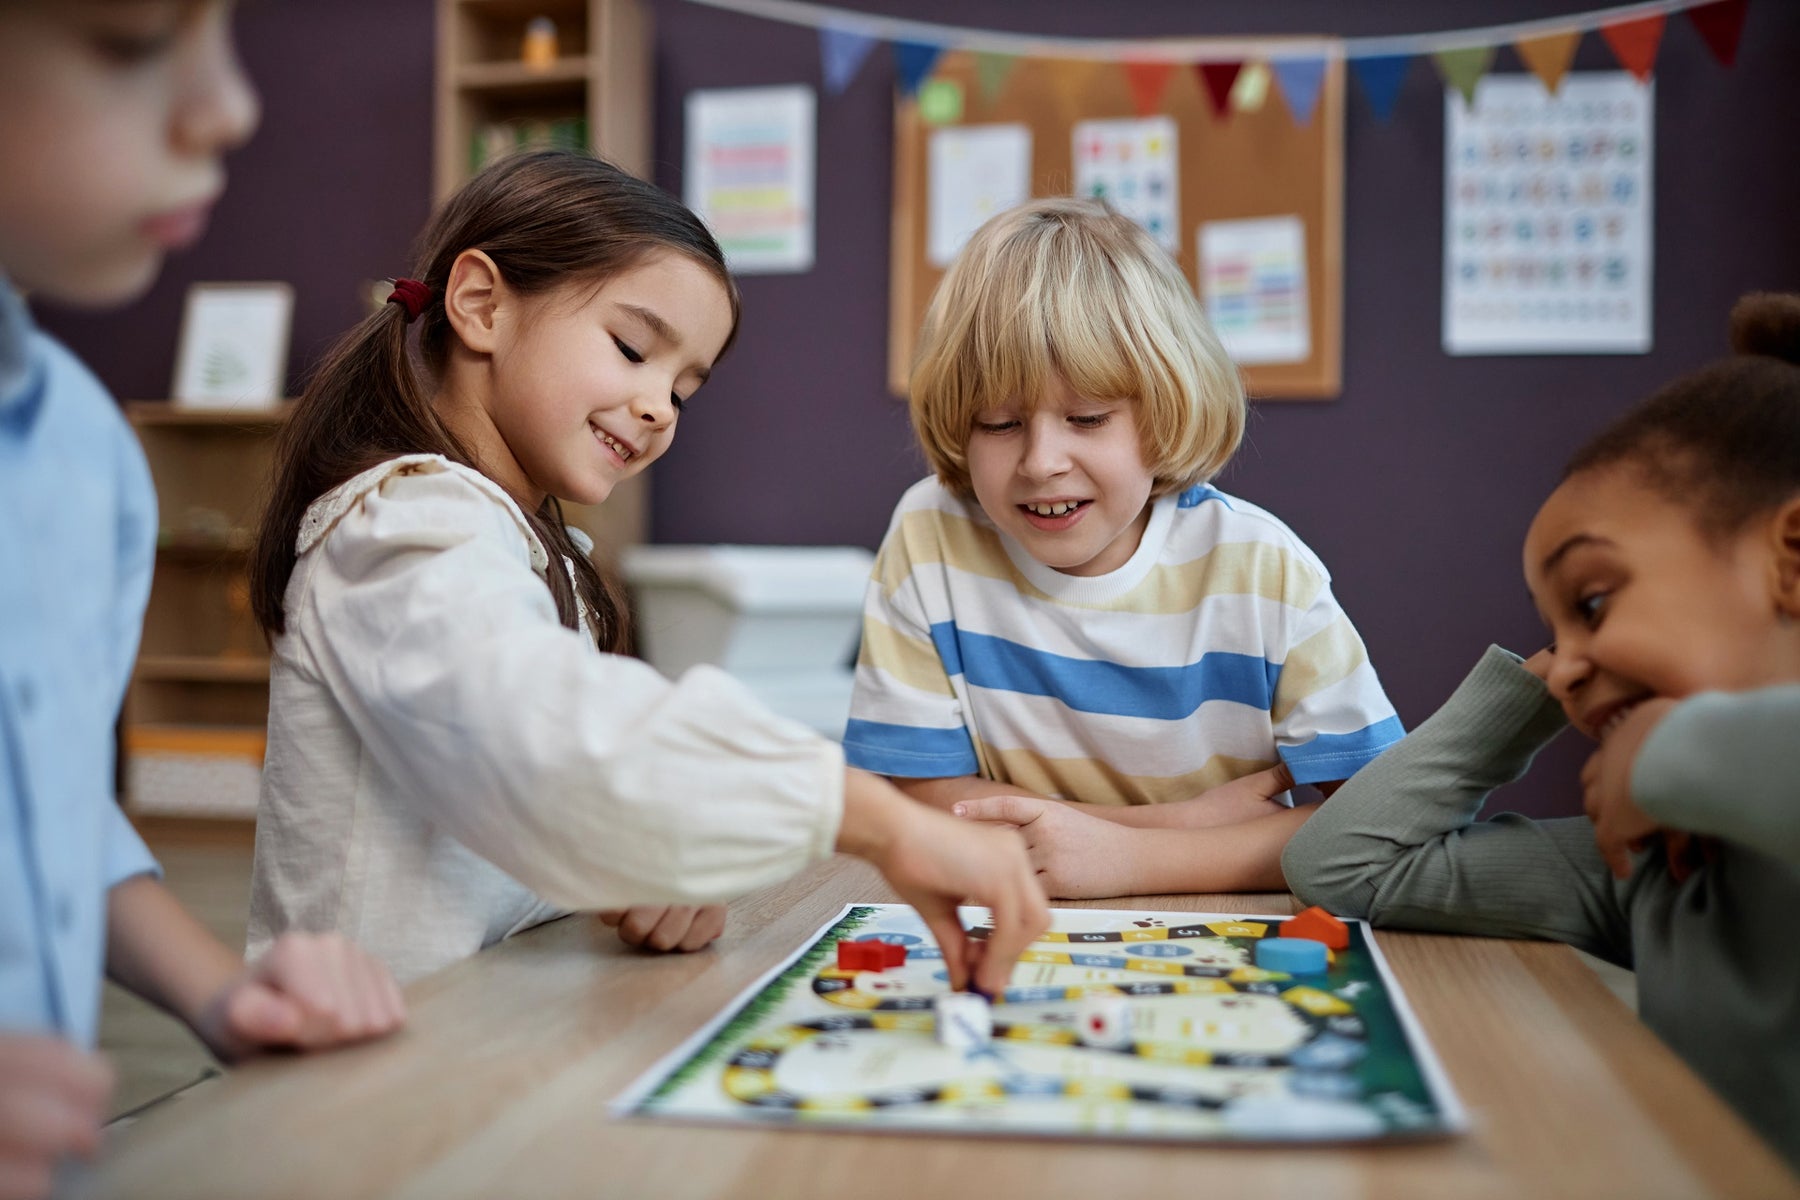 Play and Progress: How Board Games Foster Children's Foundation Skills